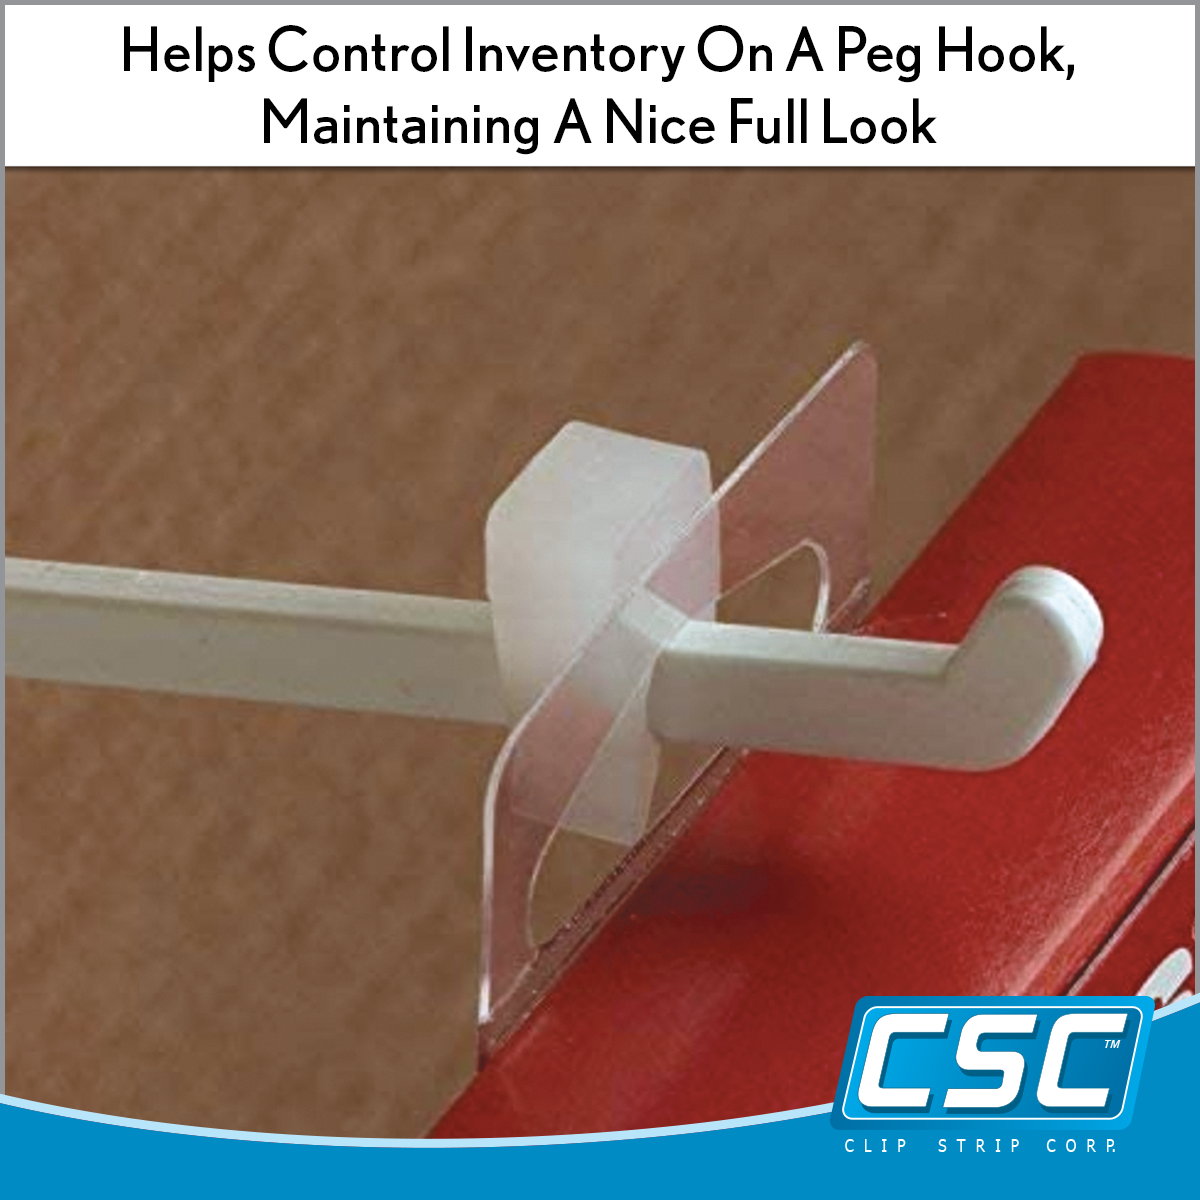 100 Pieces Inventory Control Clips For Peg Hooks 